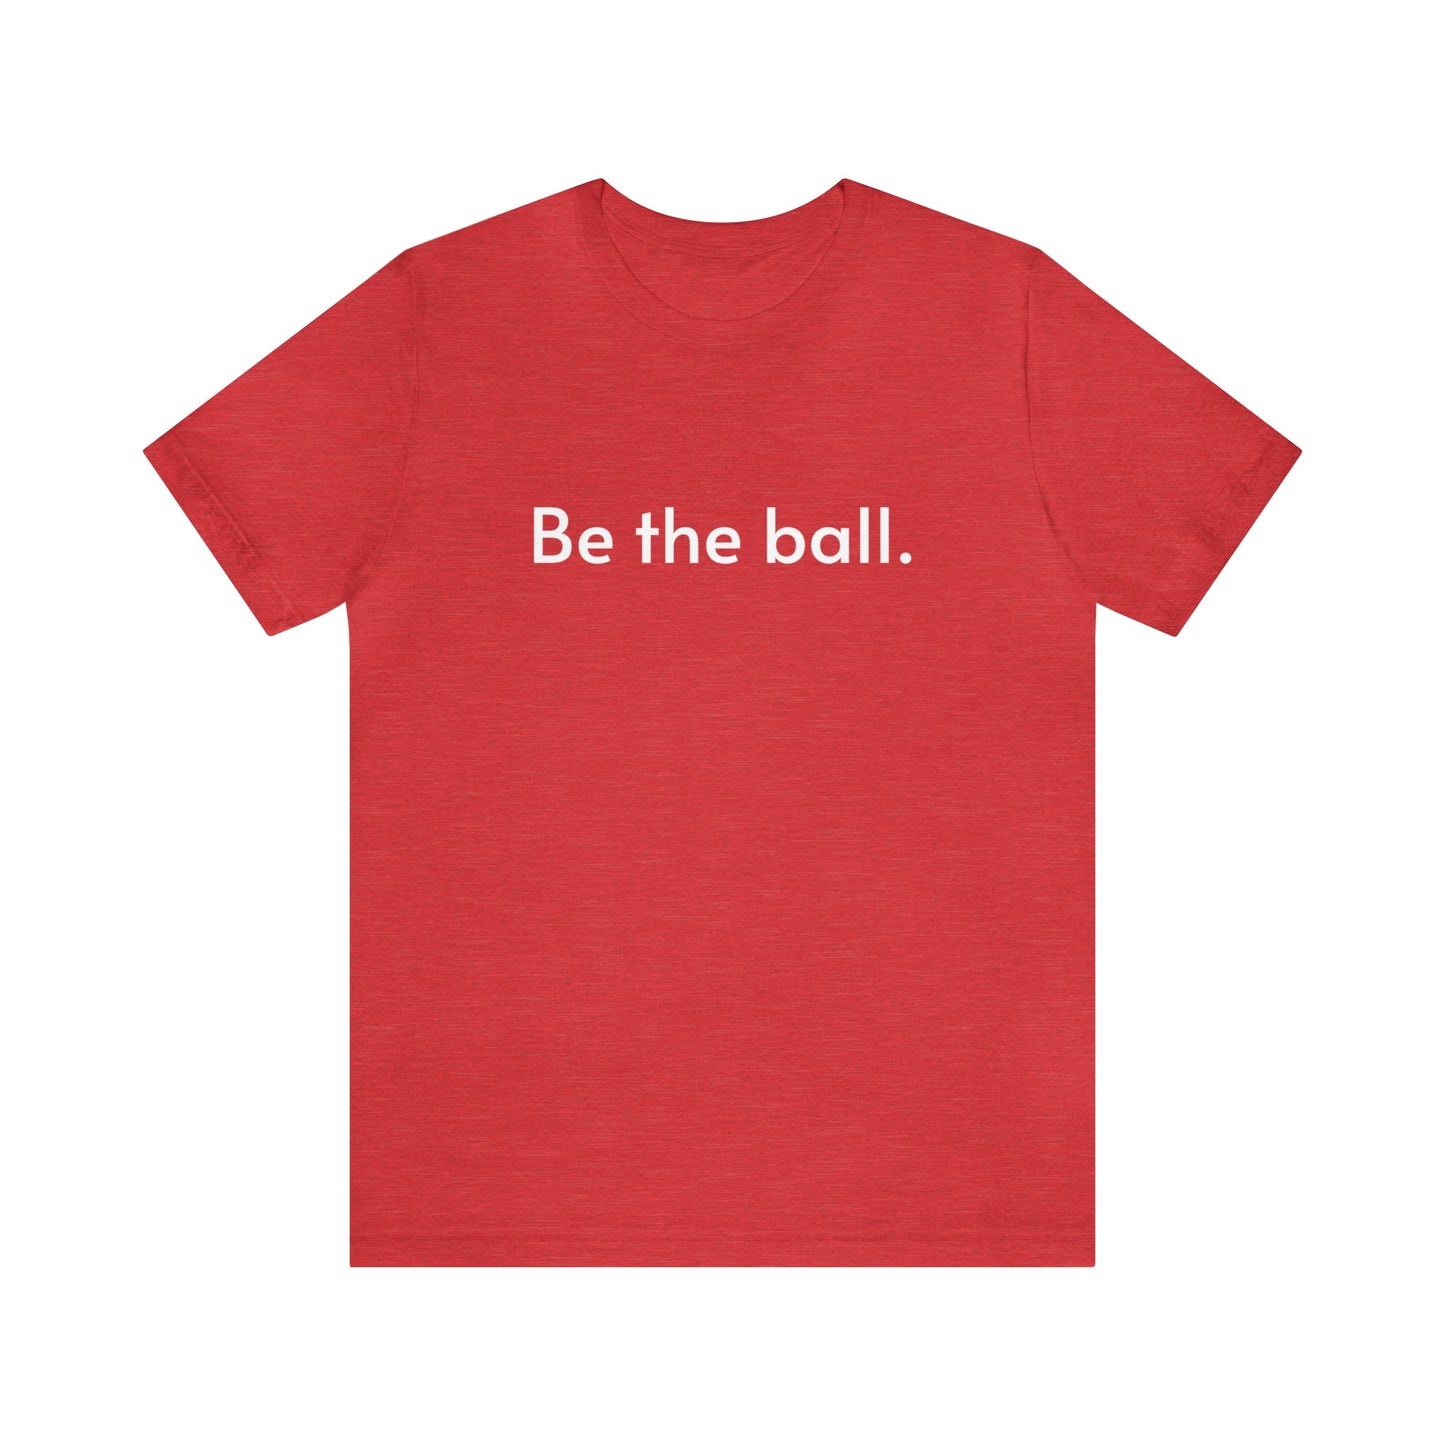 Be the ball.